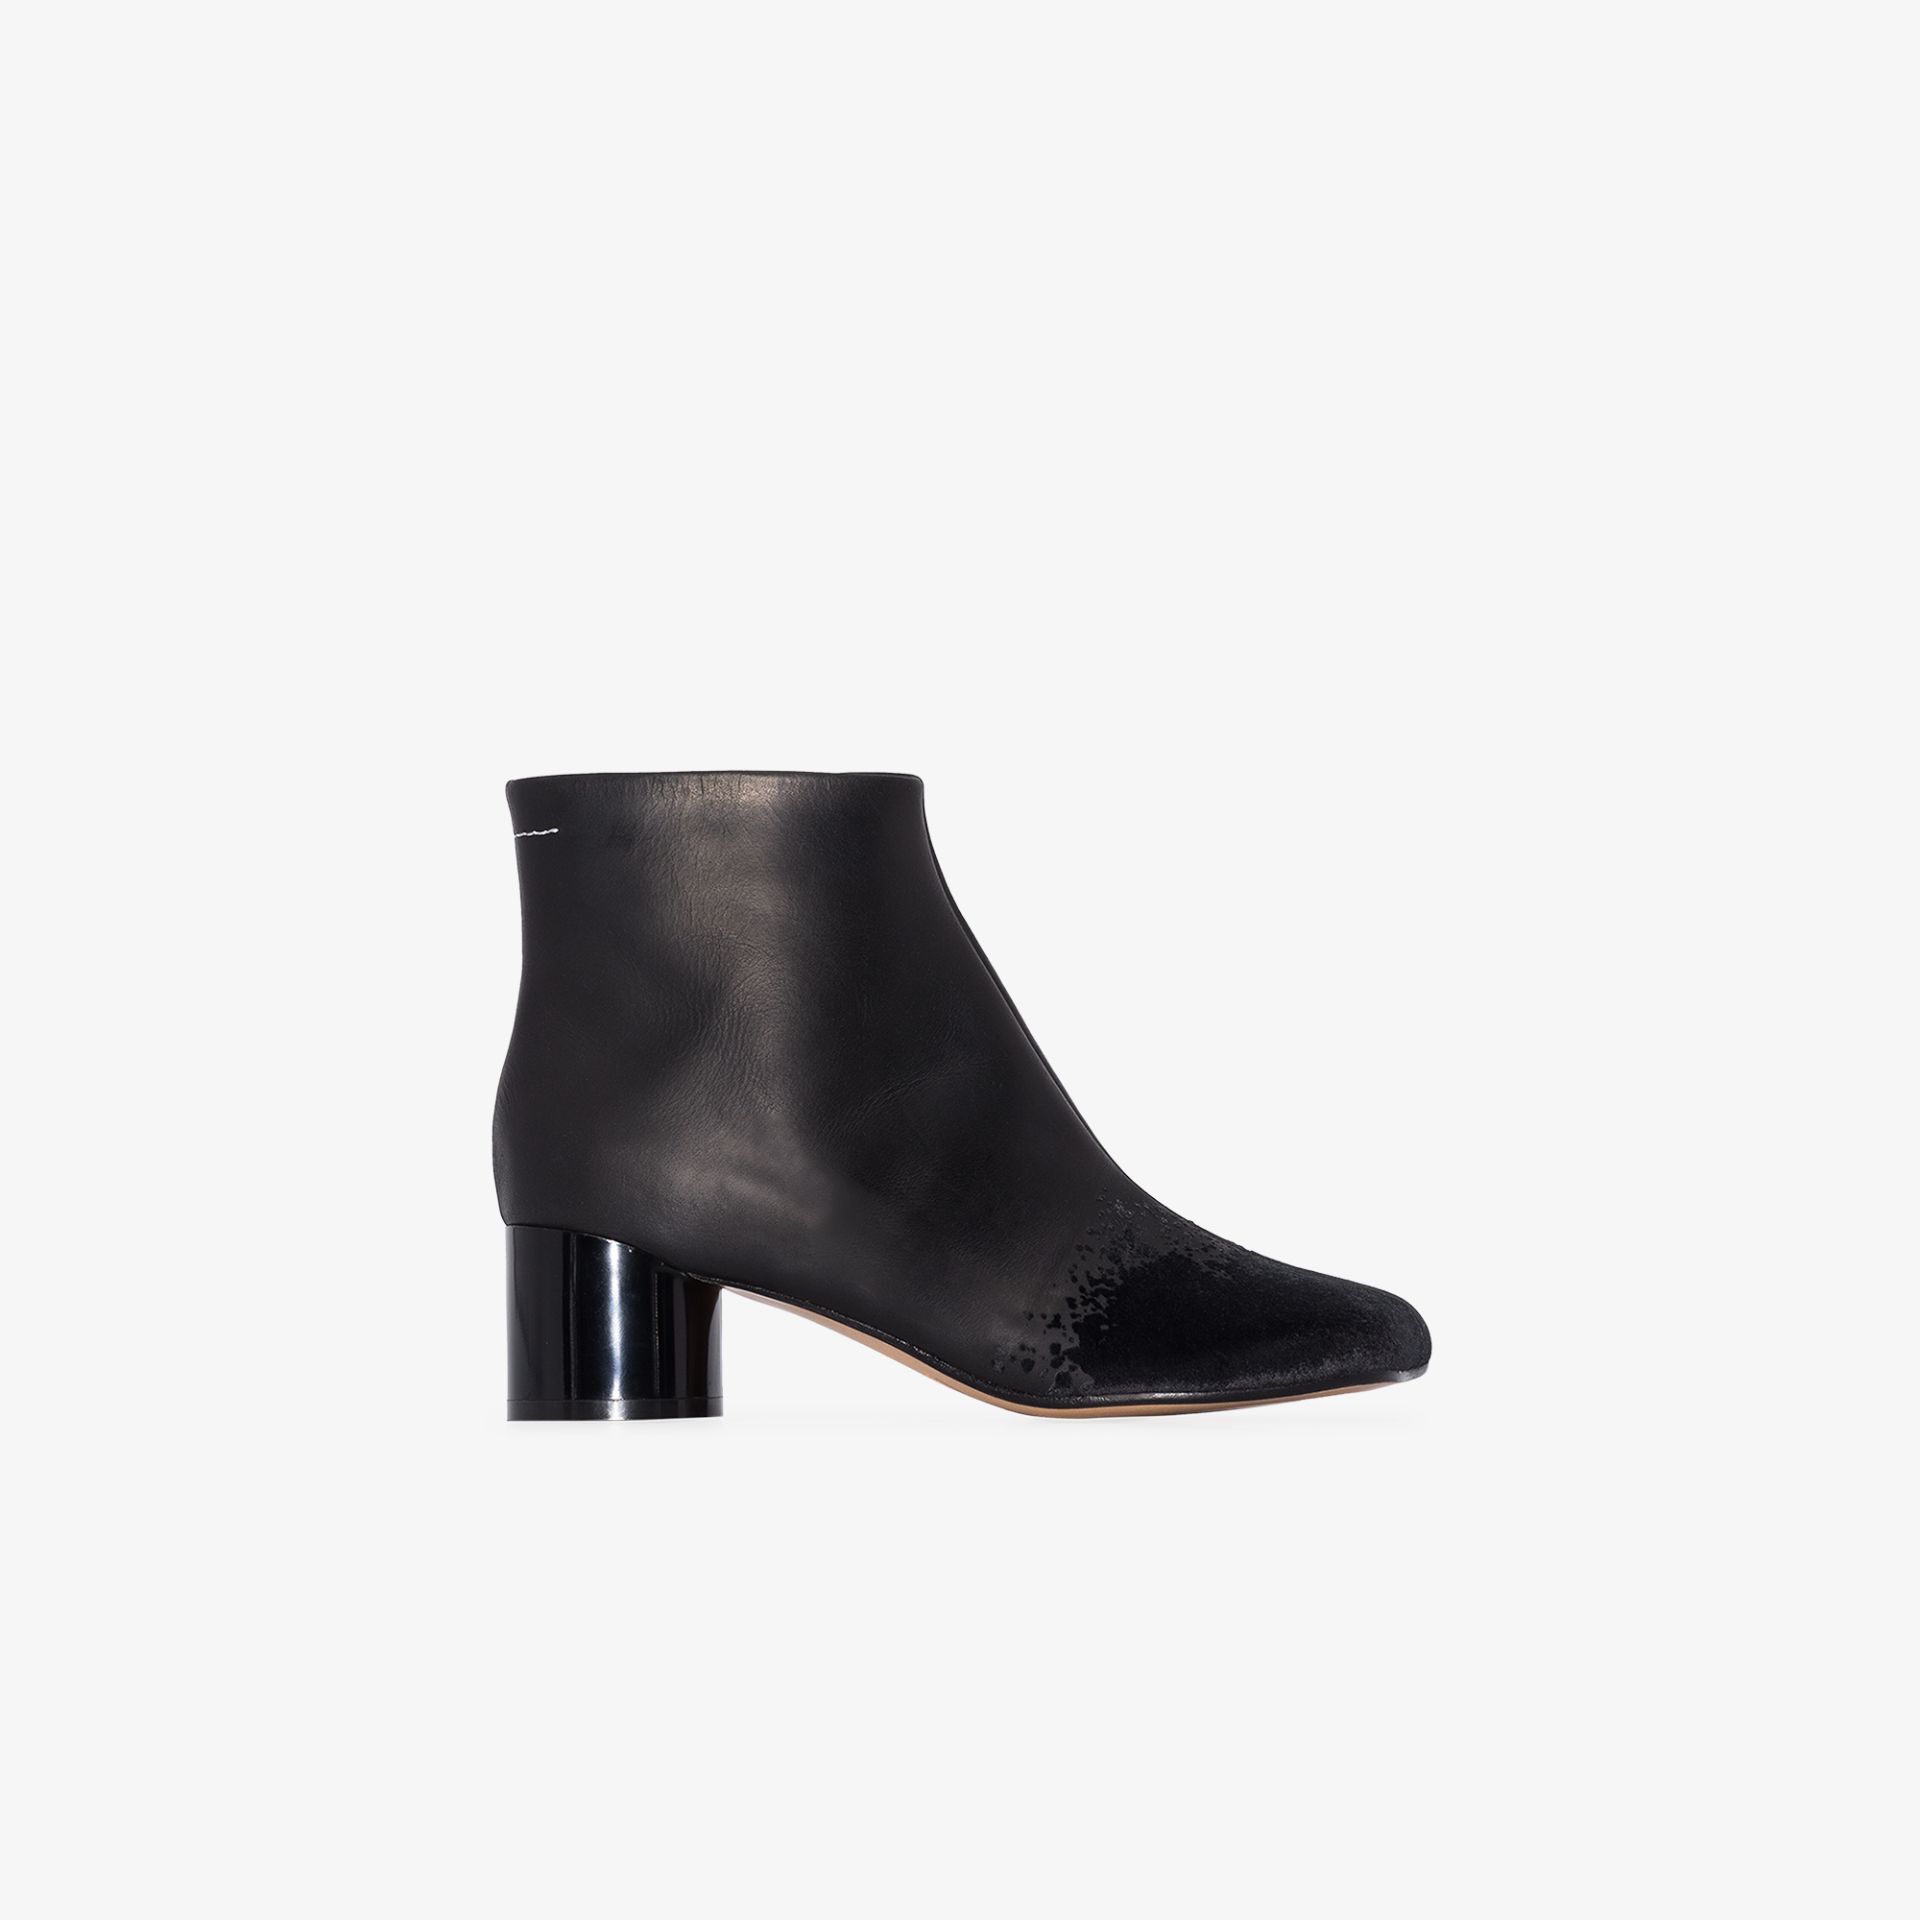 mm6 ankle boot